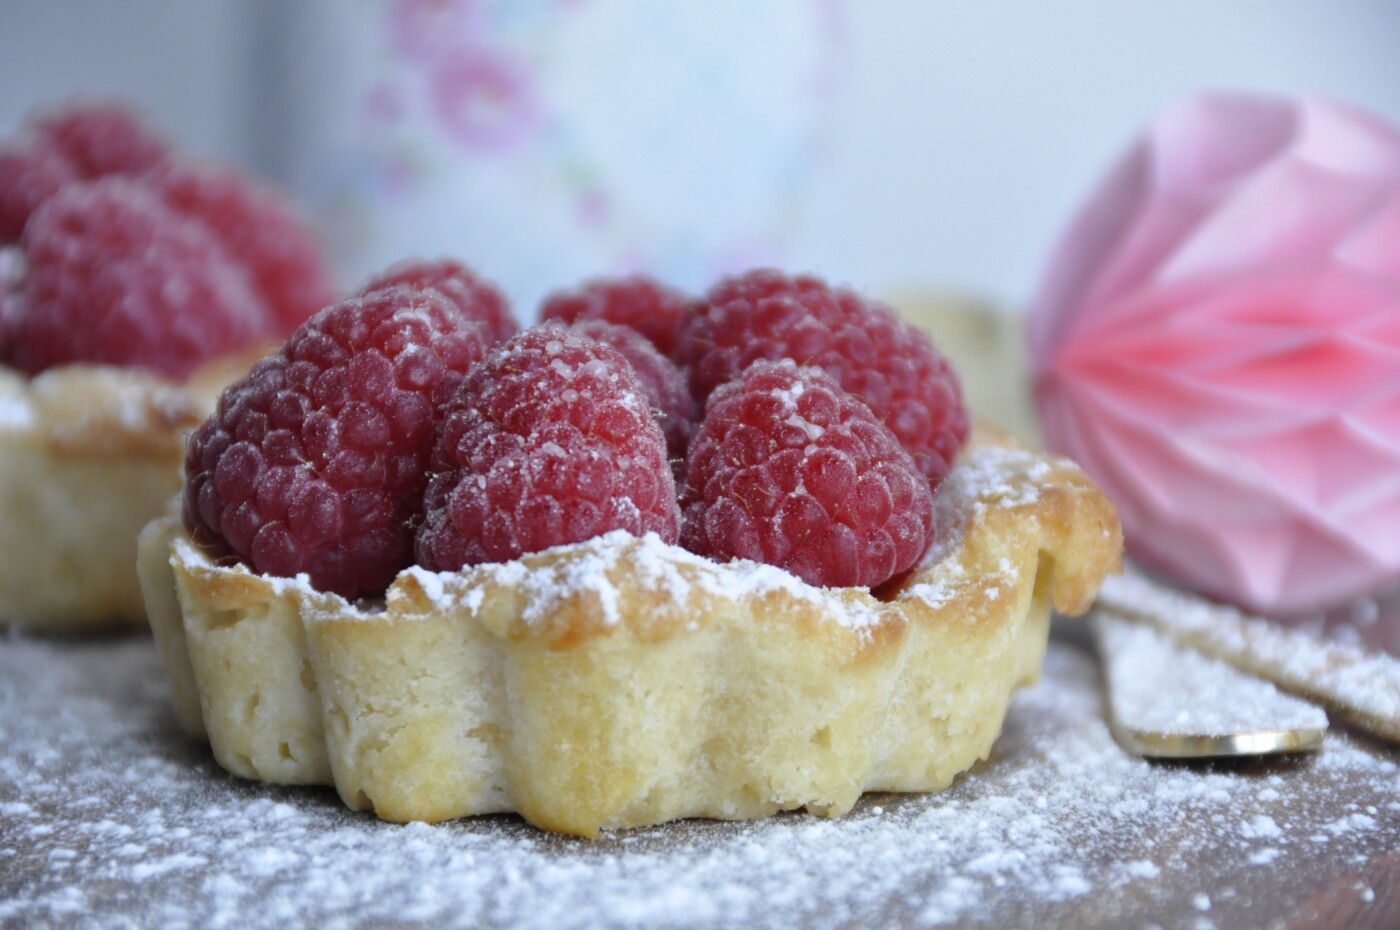 These are my lemon and raspberry tarts, which I have baked for a very special homemade wedding and baptism that I catered.  The couple was very sweet and chose a rustic look for their unique day, which was complemented with beautiful golden details.